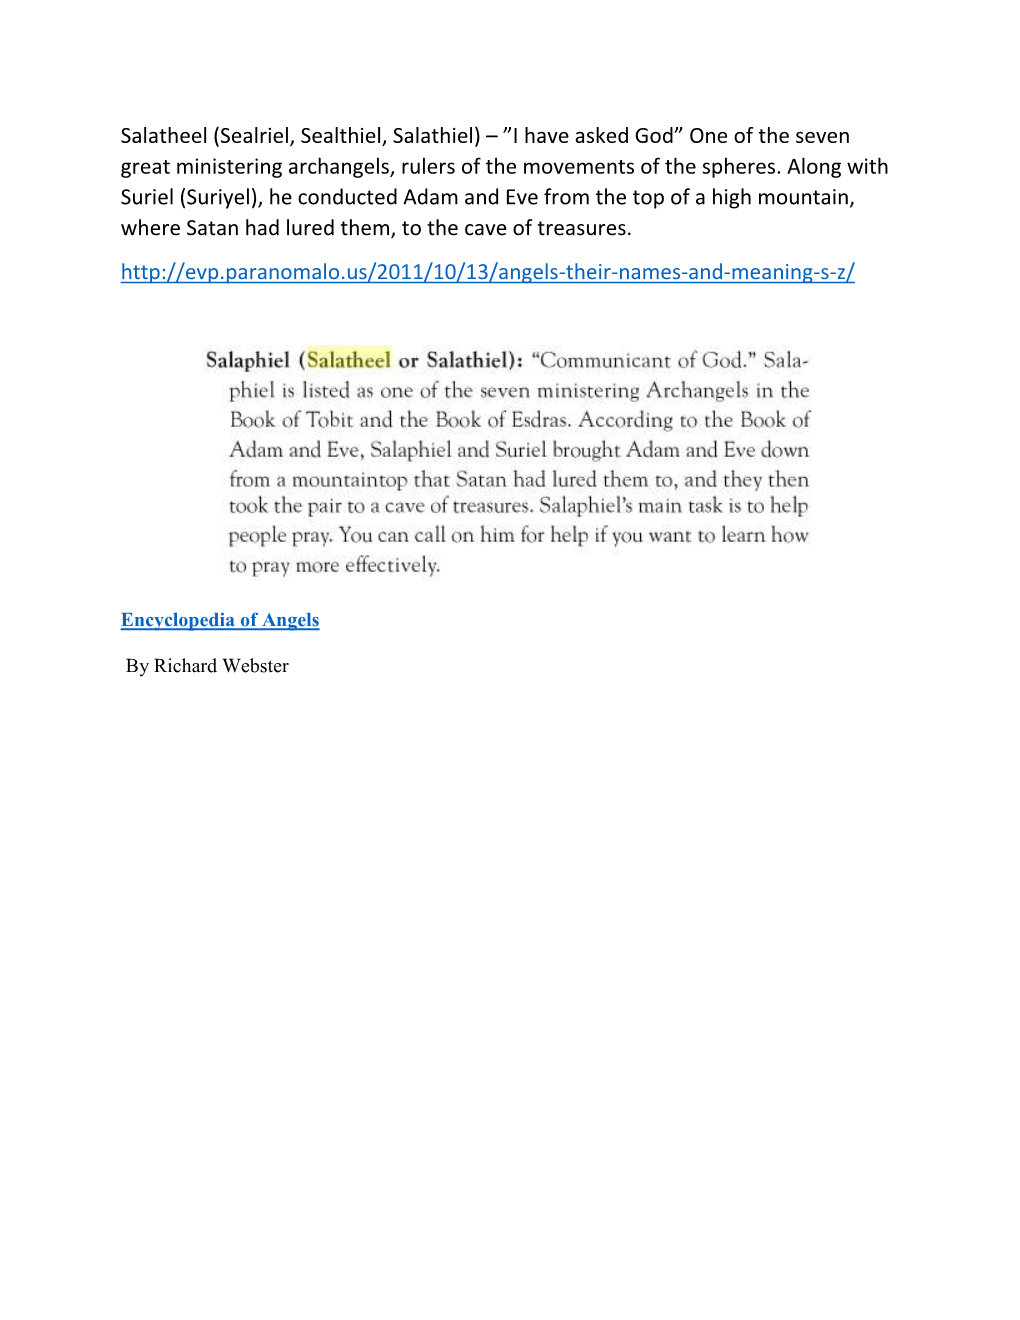 Salatheel (Sealriel, Sealthiel, Salathiel) – ”I Have Asked God” One of the Seven Great Ministering Archangels, Rulers of the Movements of the Spheres